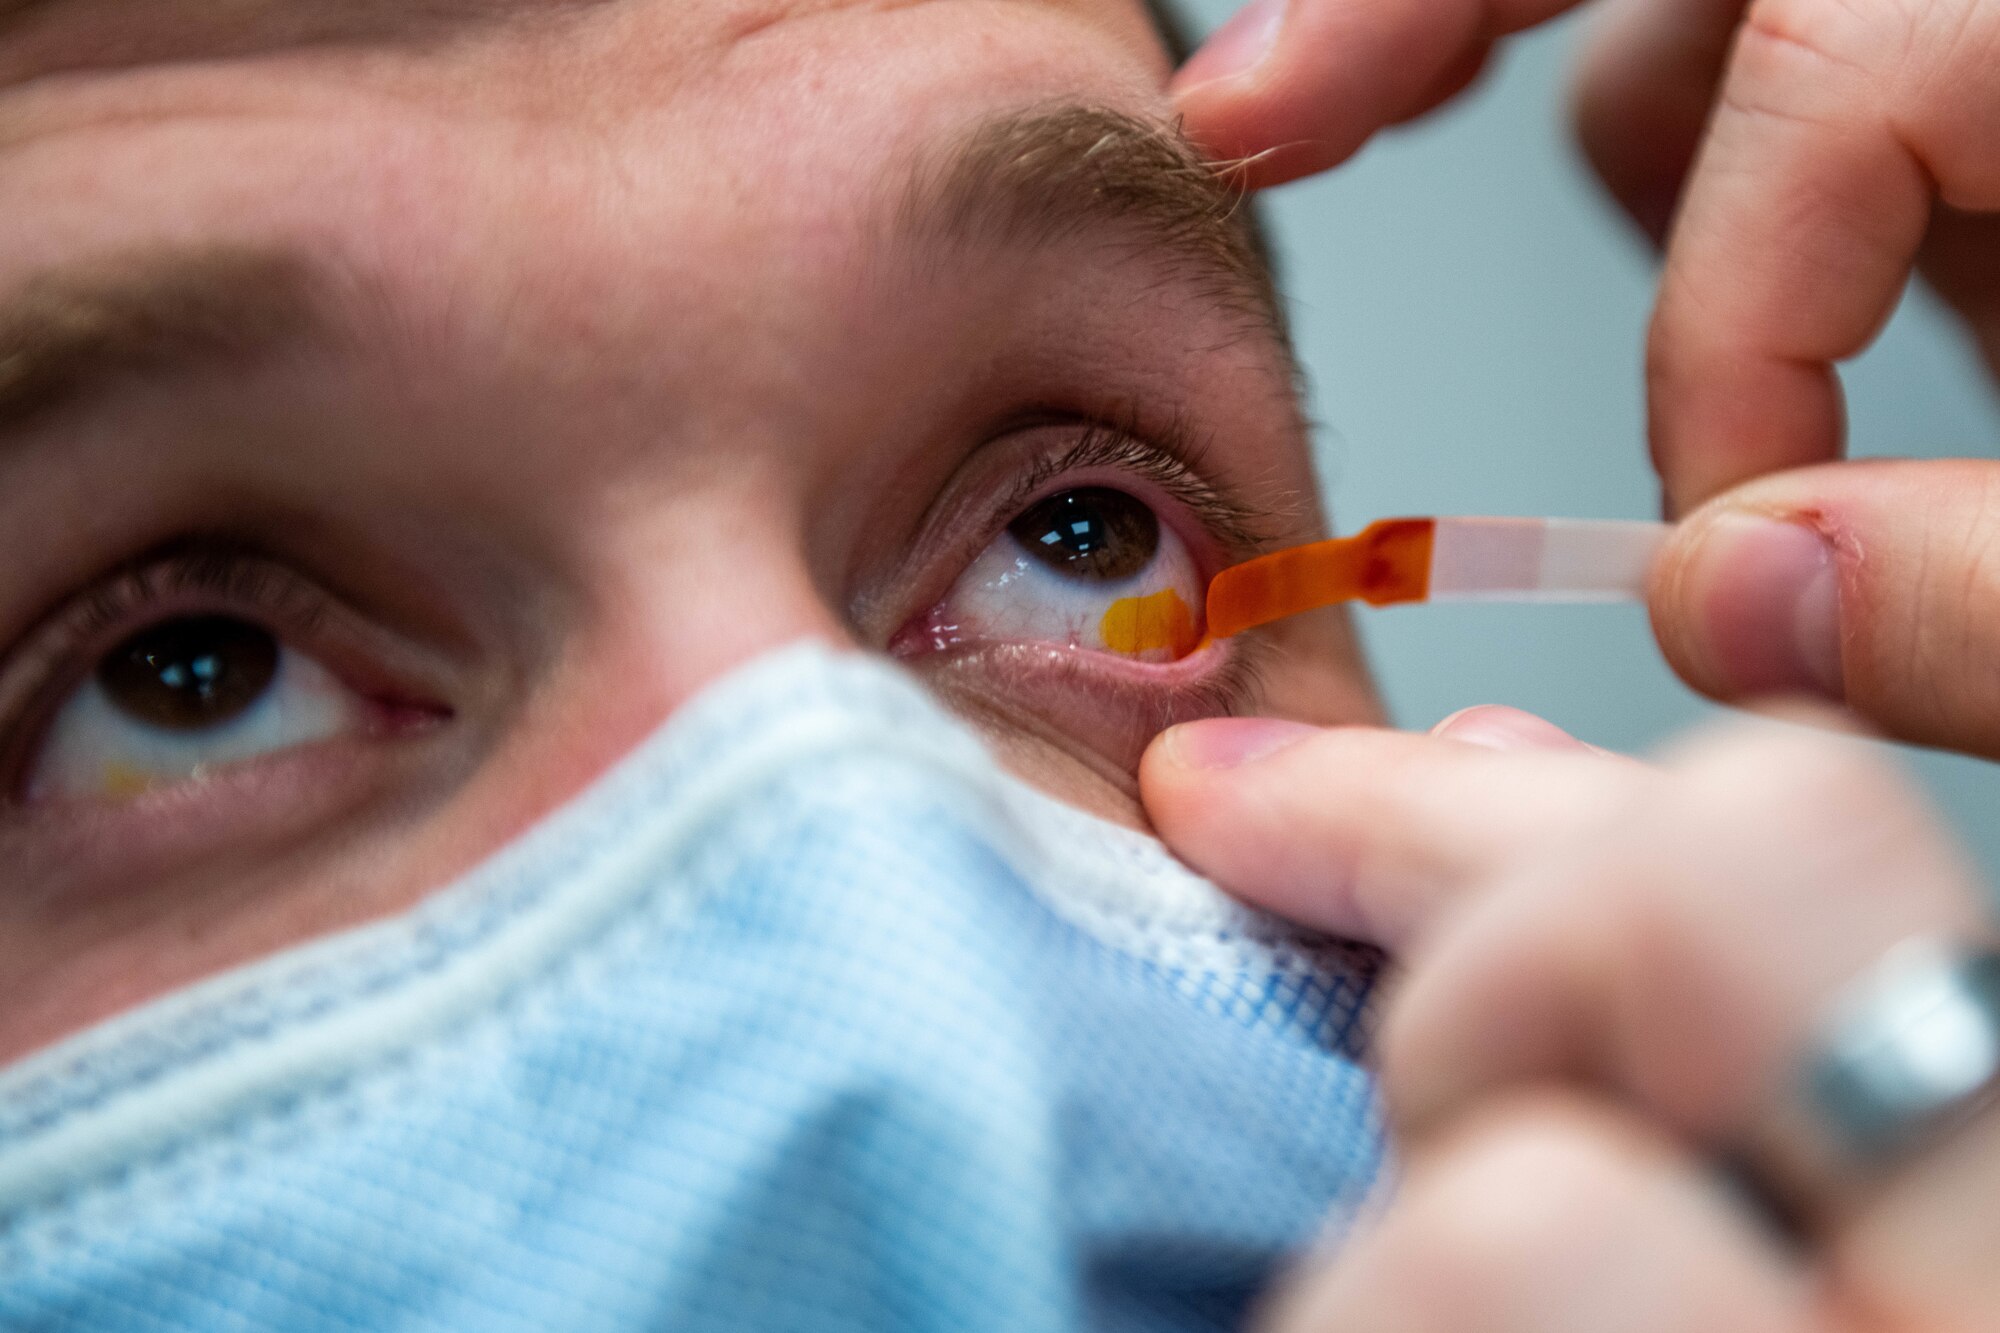 U.S. Air Force Staff Sgt. Dalton Aric, 31st Civil Engineer Squadron firefighter, has a fluorescein strip touch his eye during an eye exam at Aviano Air Base, Italy, Dec. 2, 2021. Fluorescein is used to assist in the detection of debris and corneal abrasions. (U.S. Air Force photo by Senior Airman Brooke Moeder)